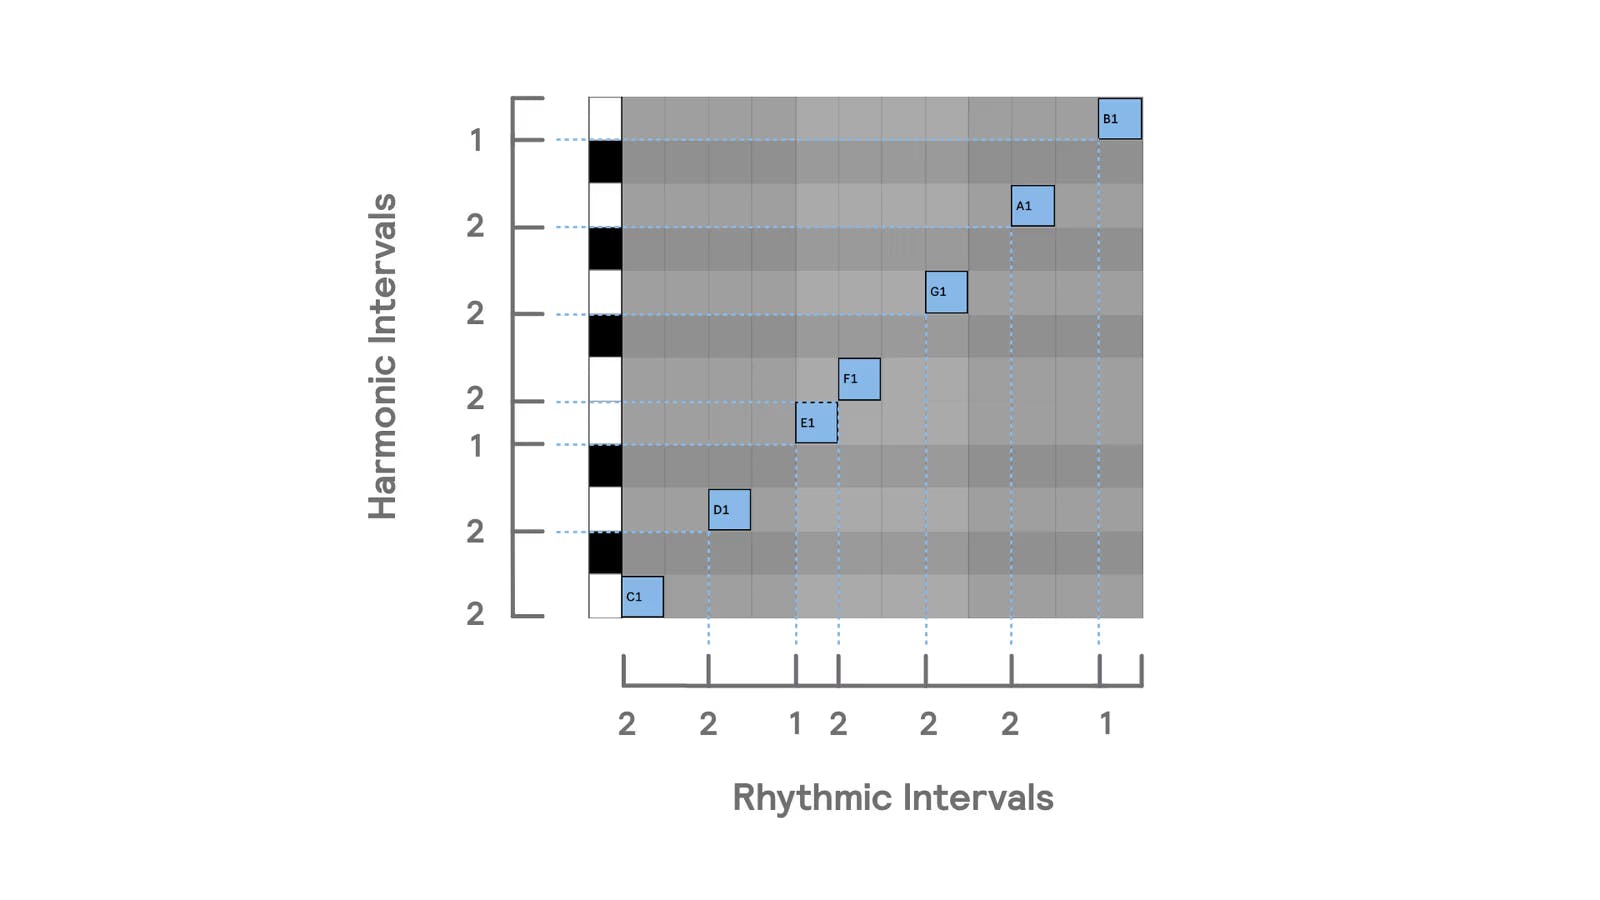 A screenshot of an Ableton piano roll with the y-axis labelled harmonic intervals and the x-axis labelled rhythmic intervals